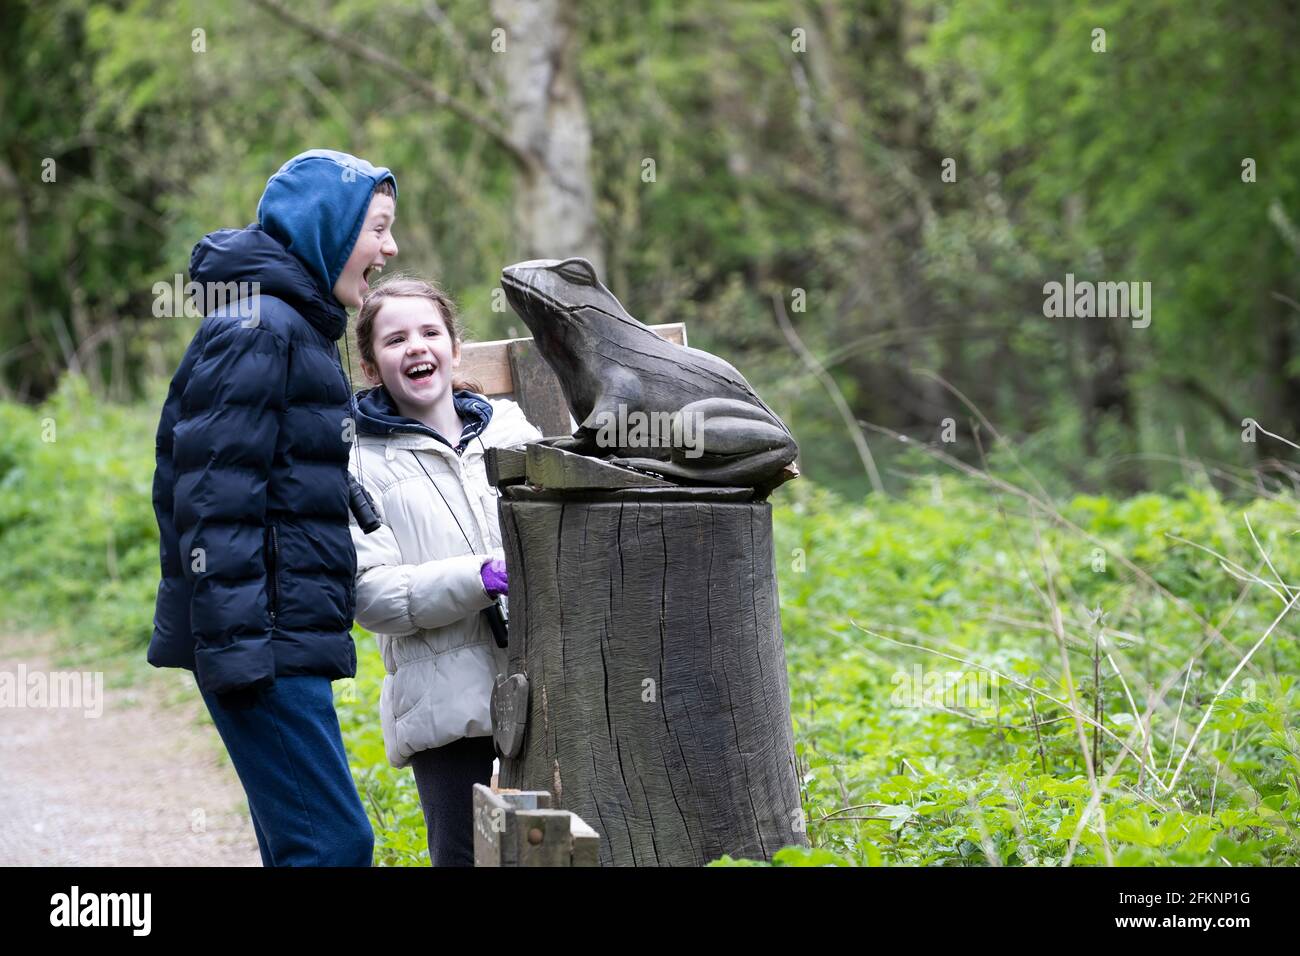 A young boy and girl laughing and enjoying an encounter with a large model of a frog at RSPB Fairburn Ings nature reserve in Yorkshire, U.K. Stock Photo